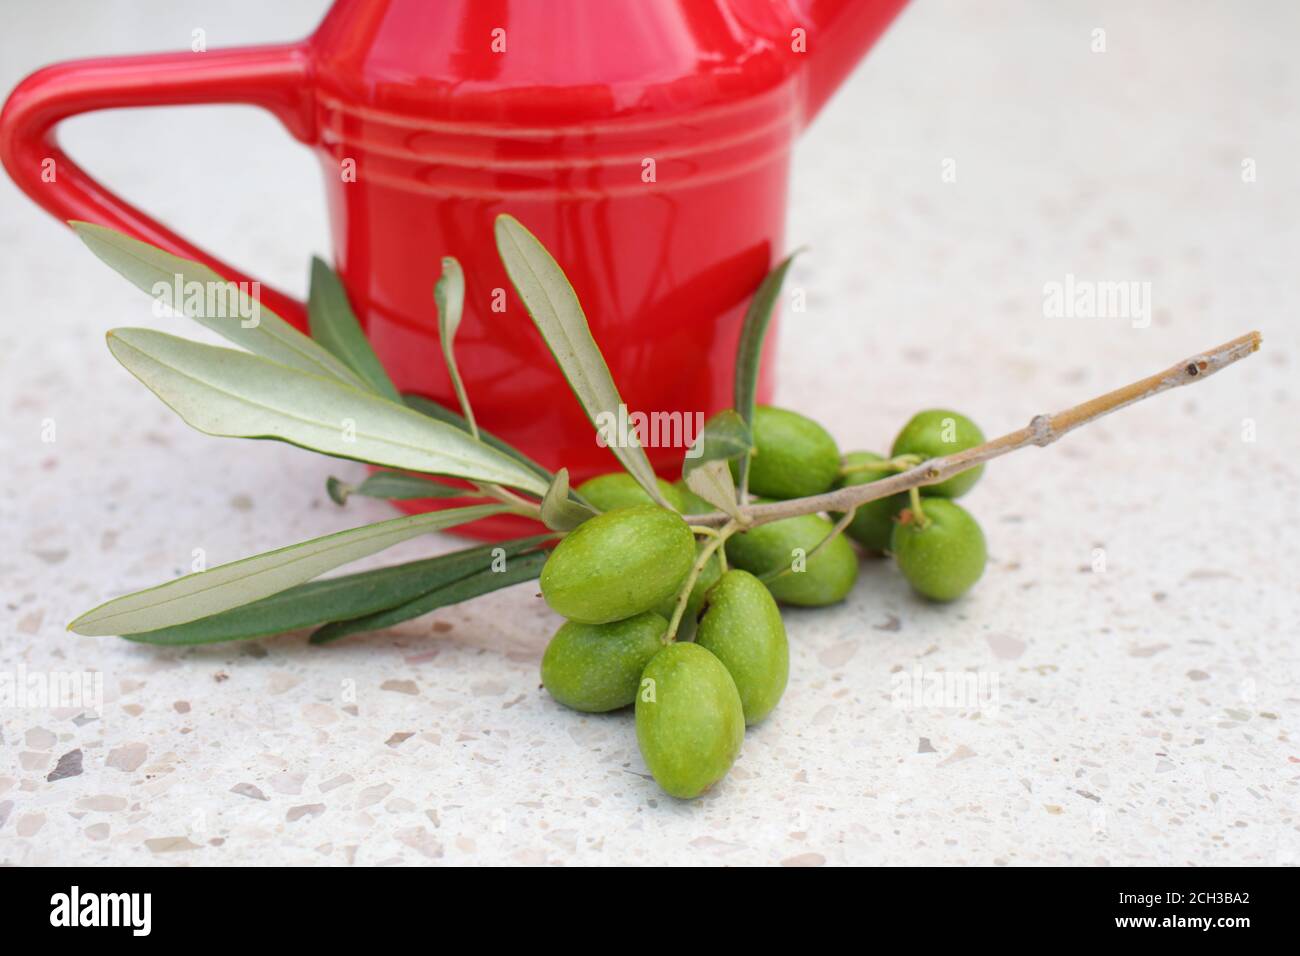 Branch of green olives and a jug of olive oil Stock Photo